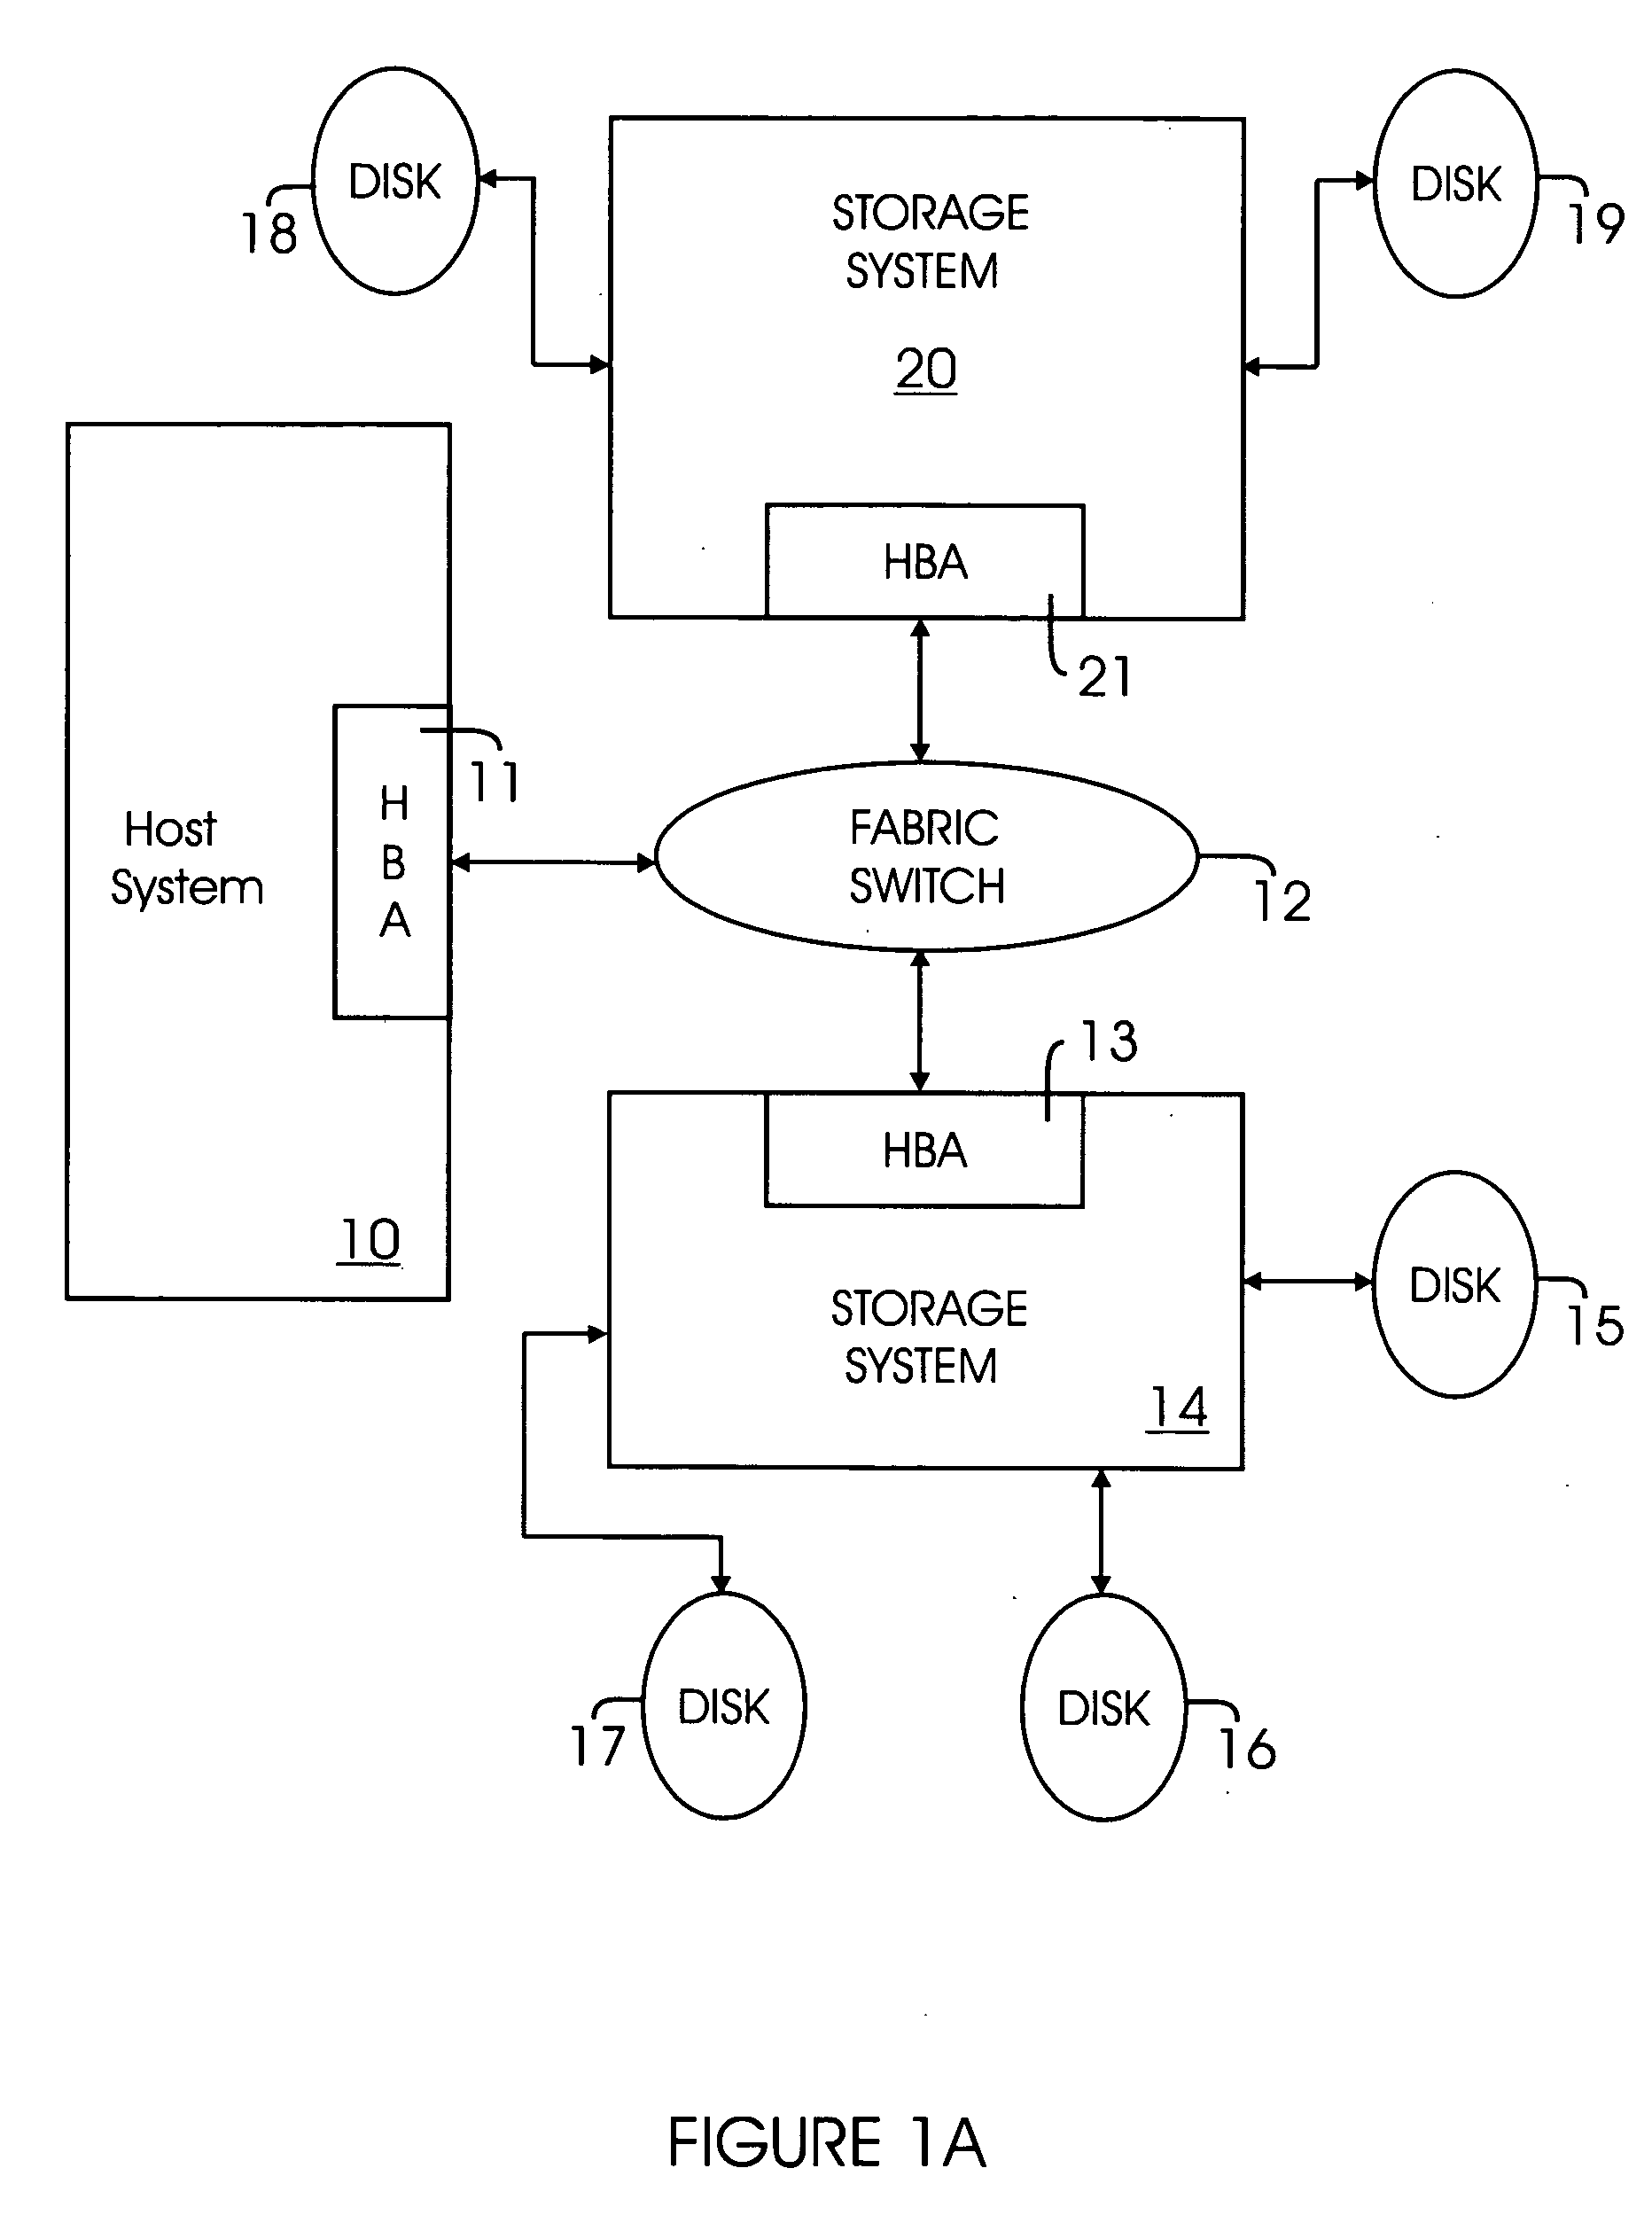 Method and system for transferring data drectly between storage devices in a storage area network